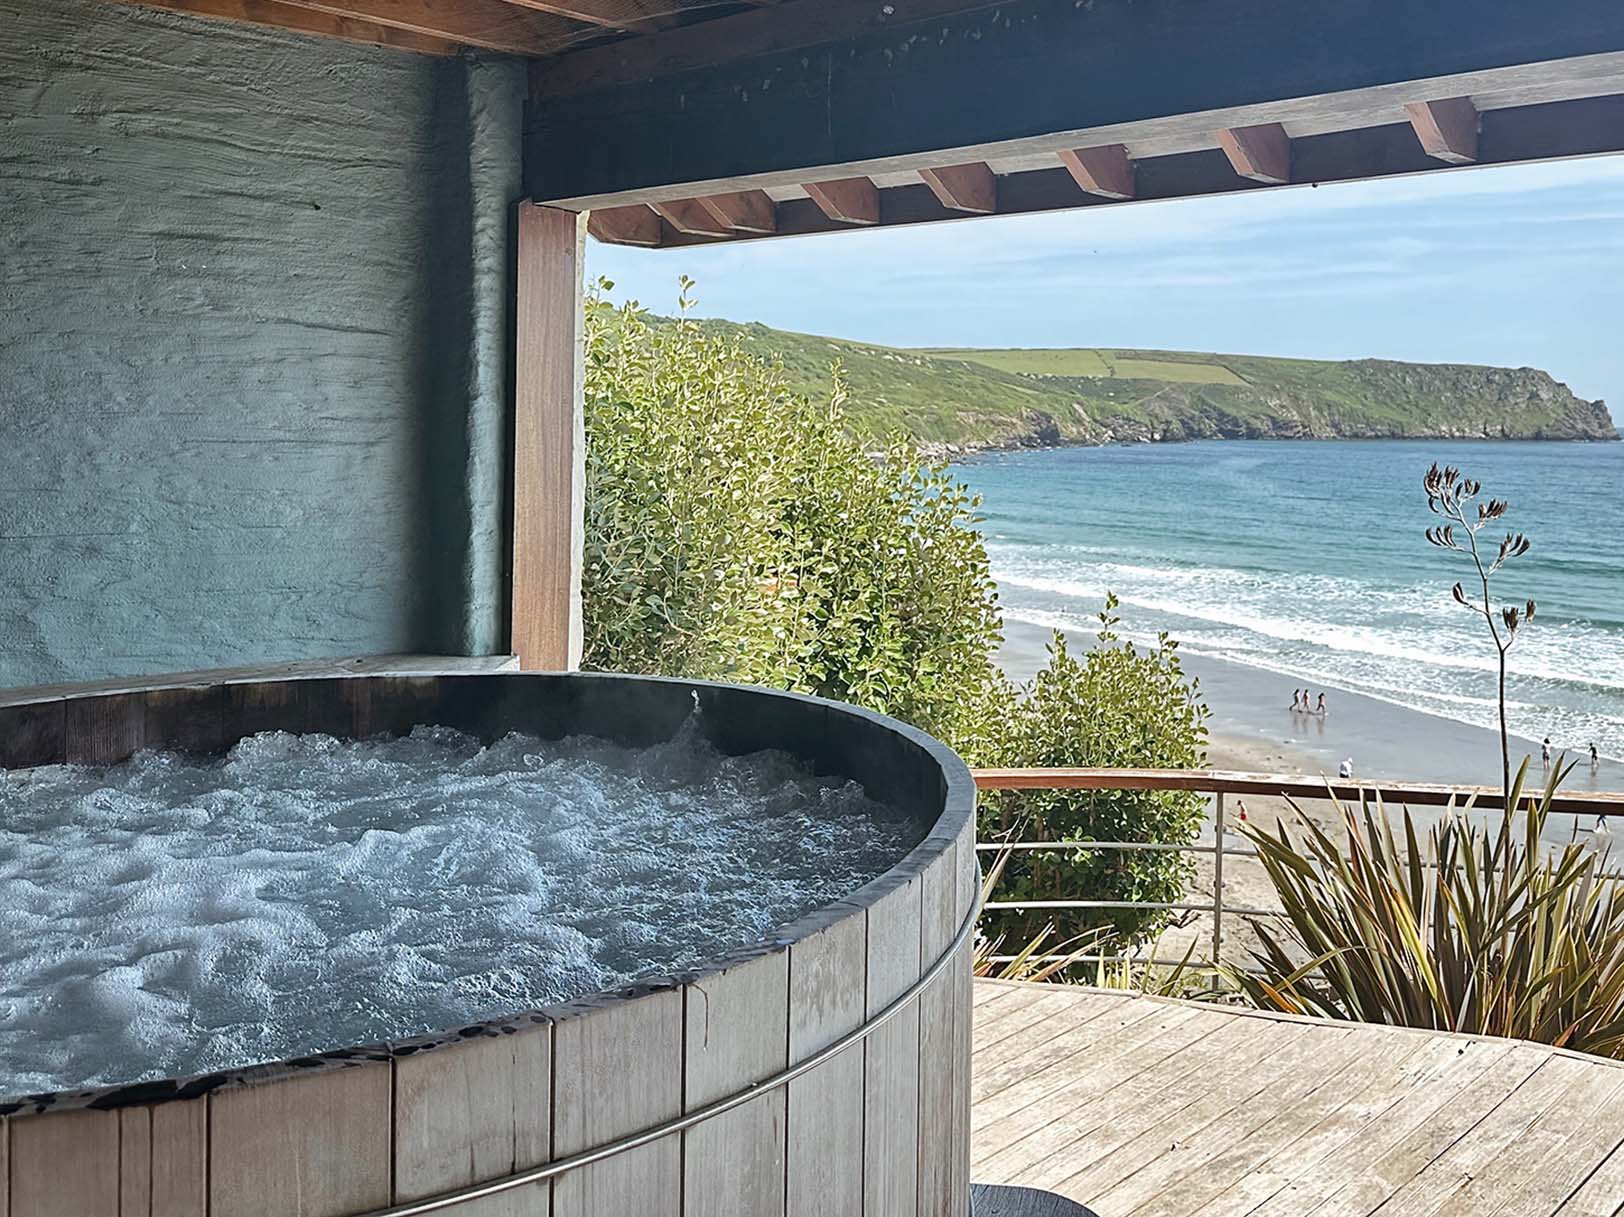 Views from the hot tub at Carne Bay Spa